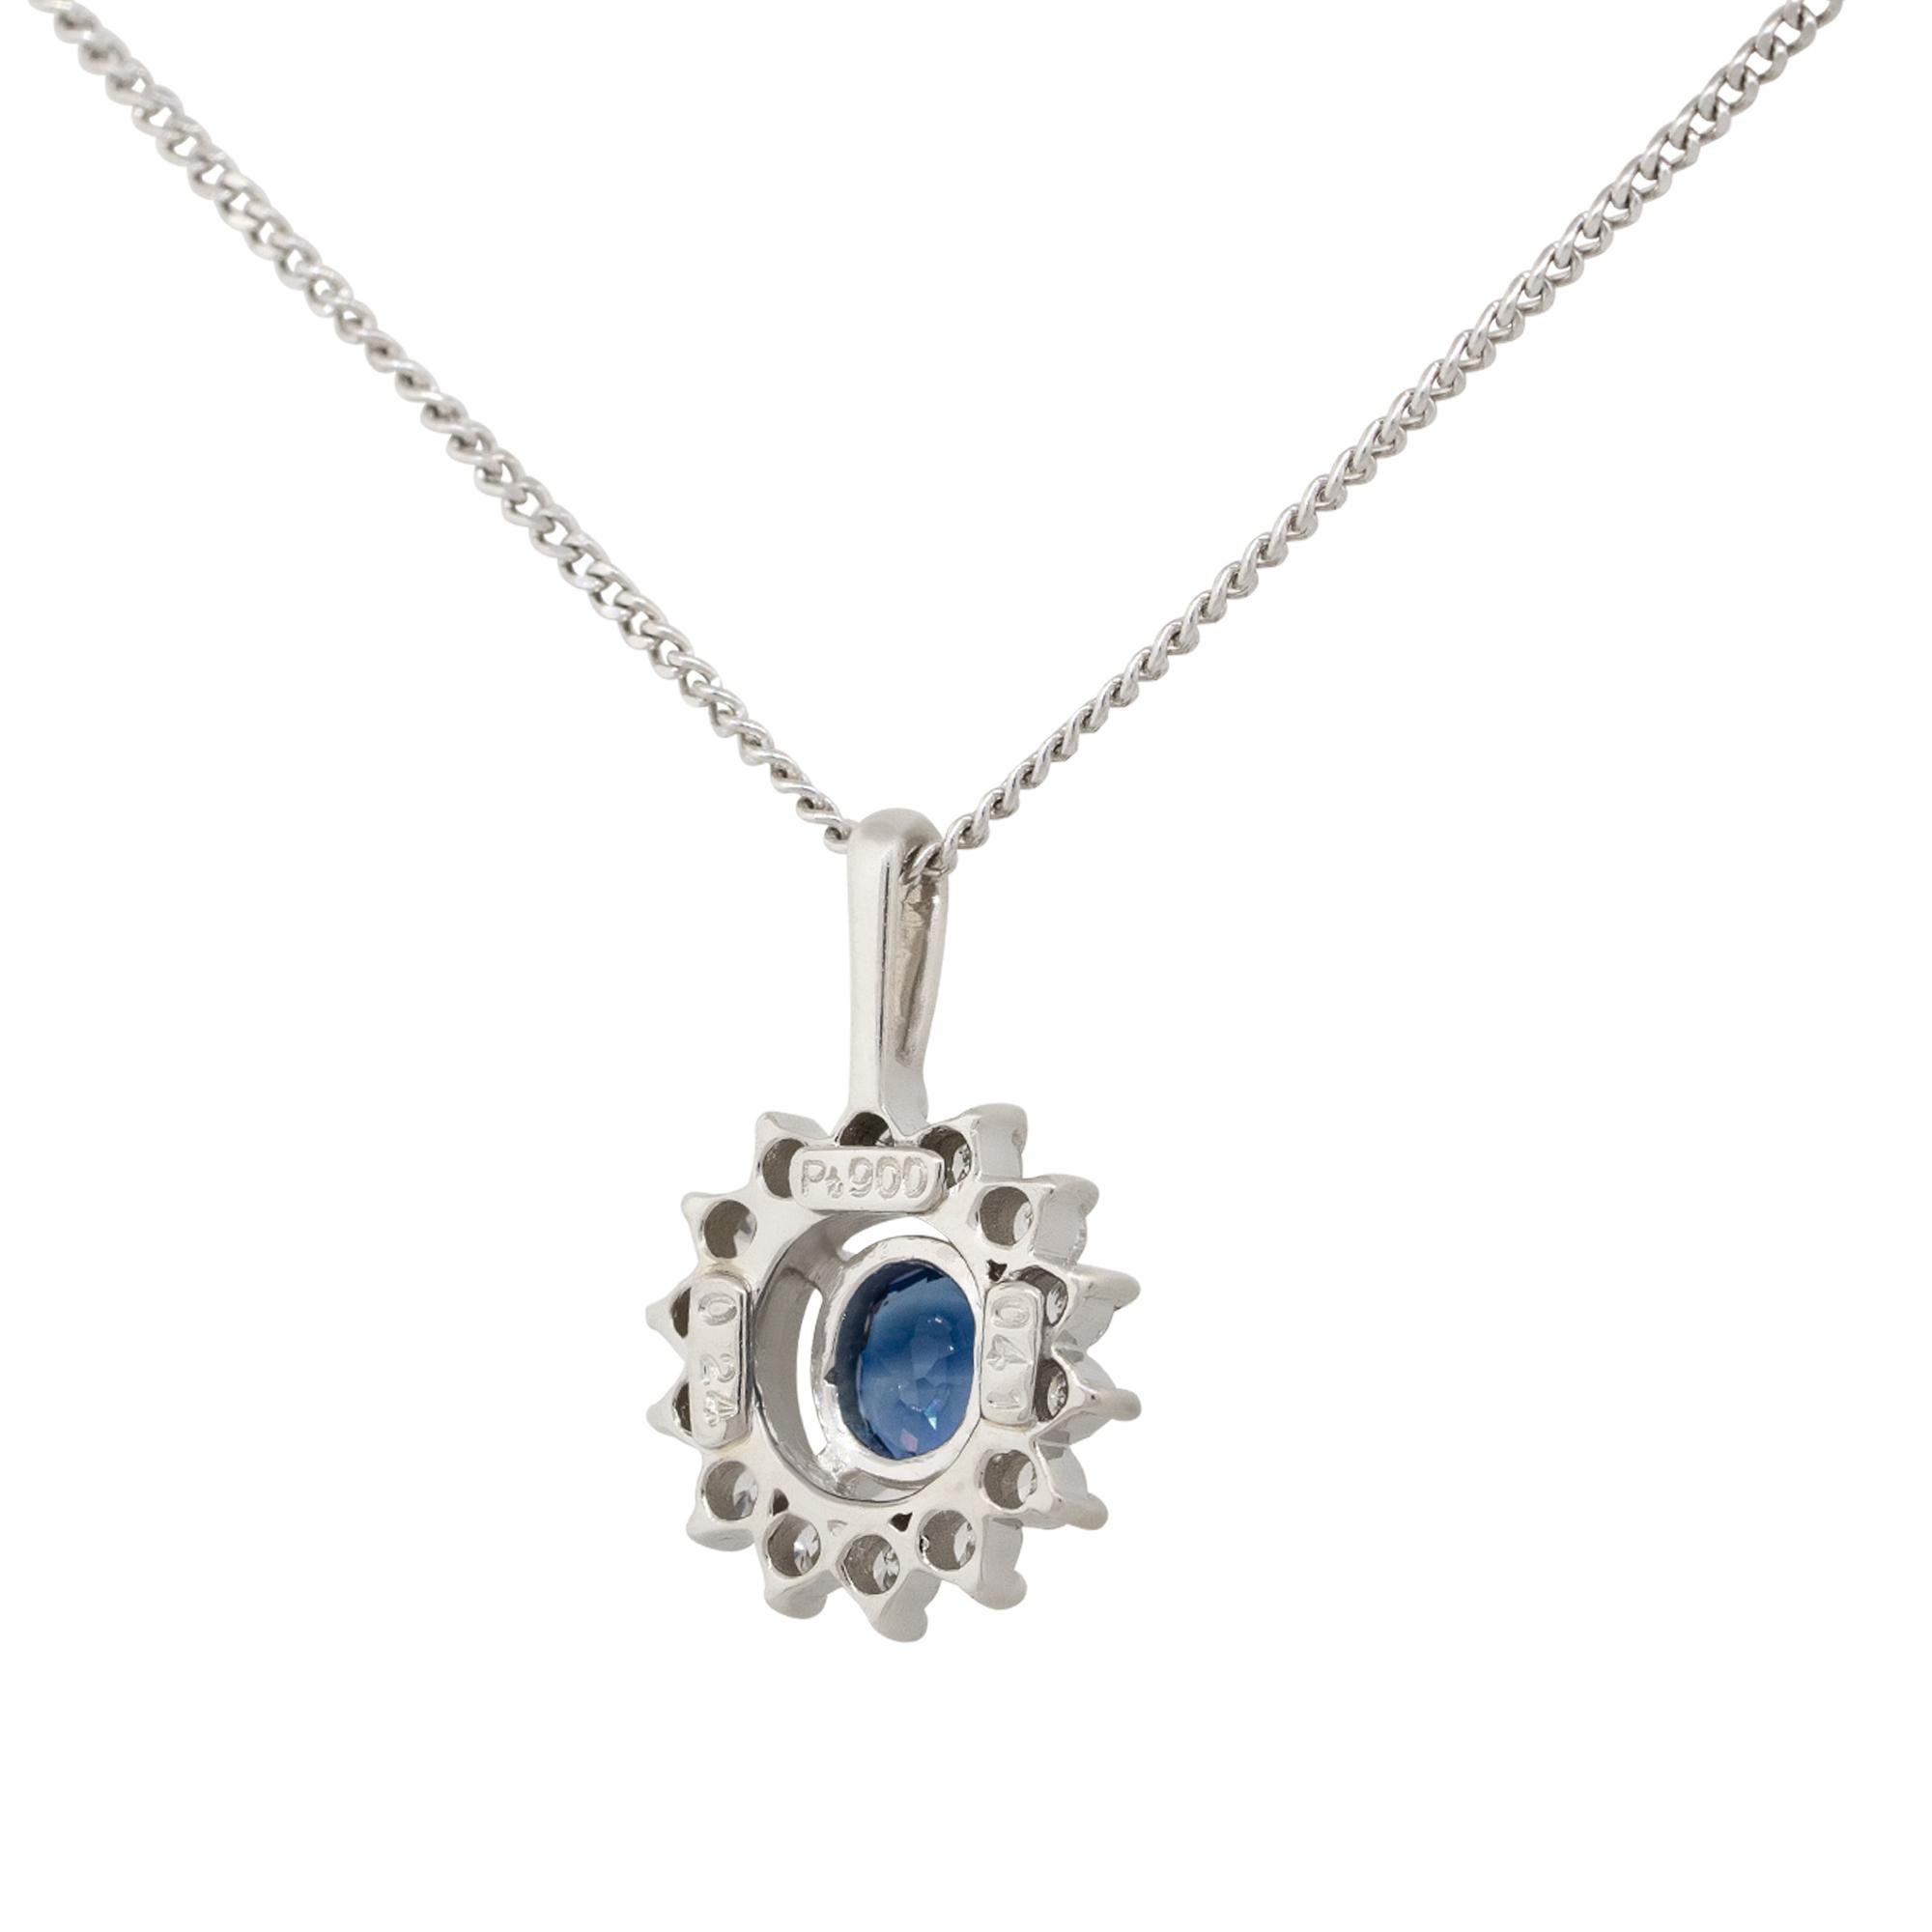 0.41 Carat Oval Floating Sapphire Pendant Necklace with Diamonds Platinum In New Condition For Sale In Boca Raton, FL